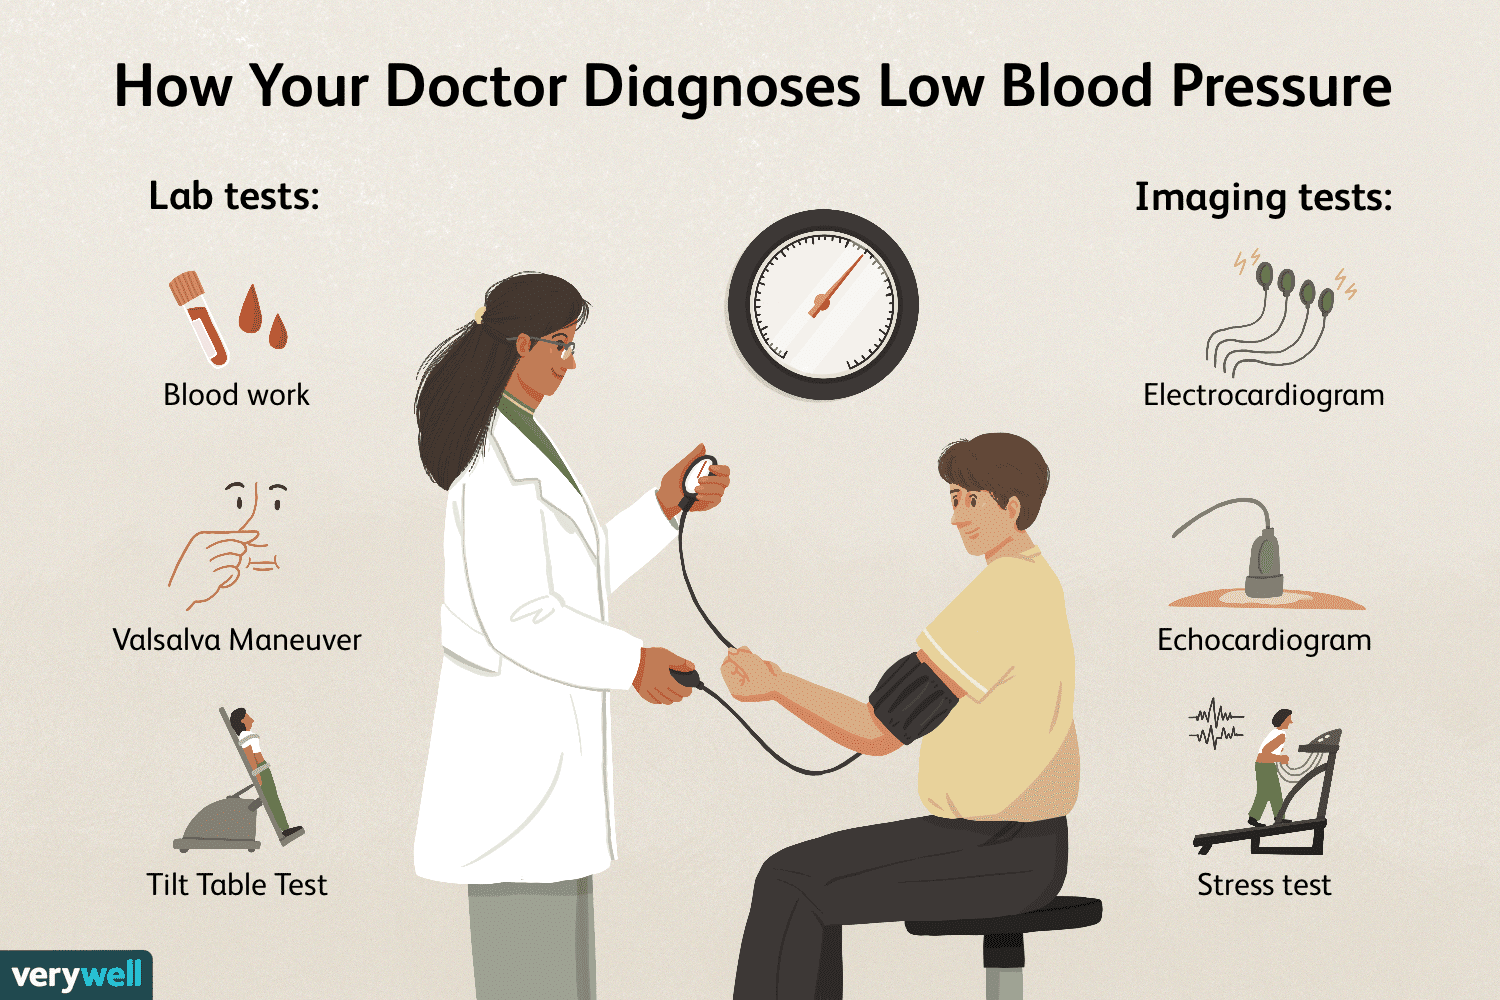 How Low Blood Pressure Is Diagnosed